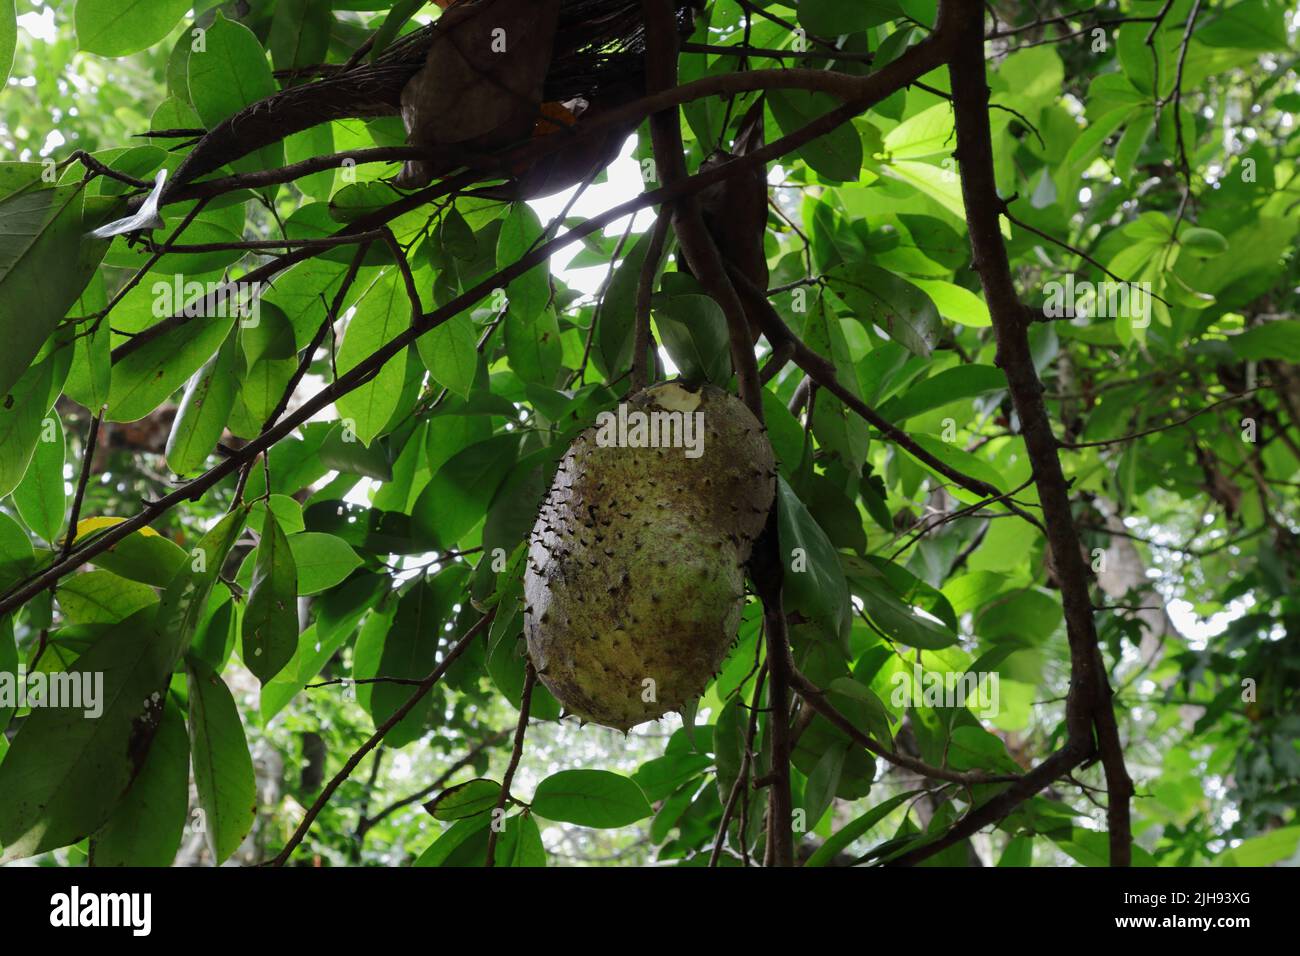 A ripe Soursop (Annona muricata) fruit eaten by the wild animals before fruit harvest it from the tree Stock Photo